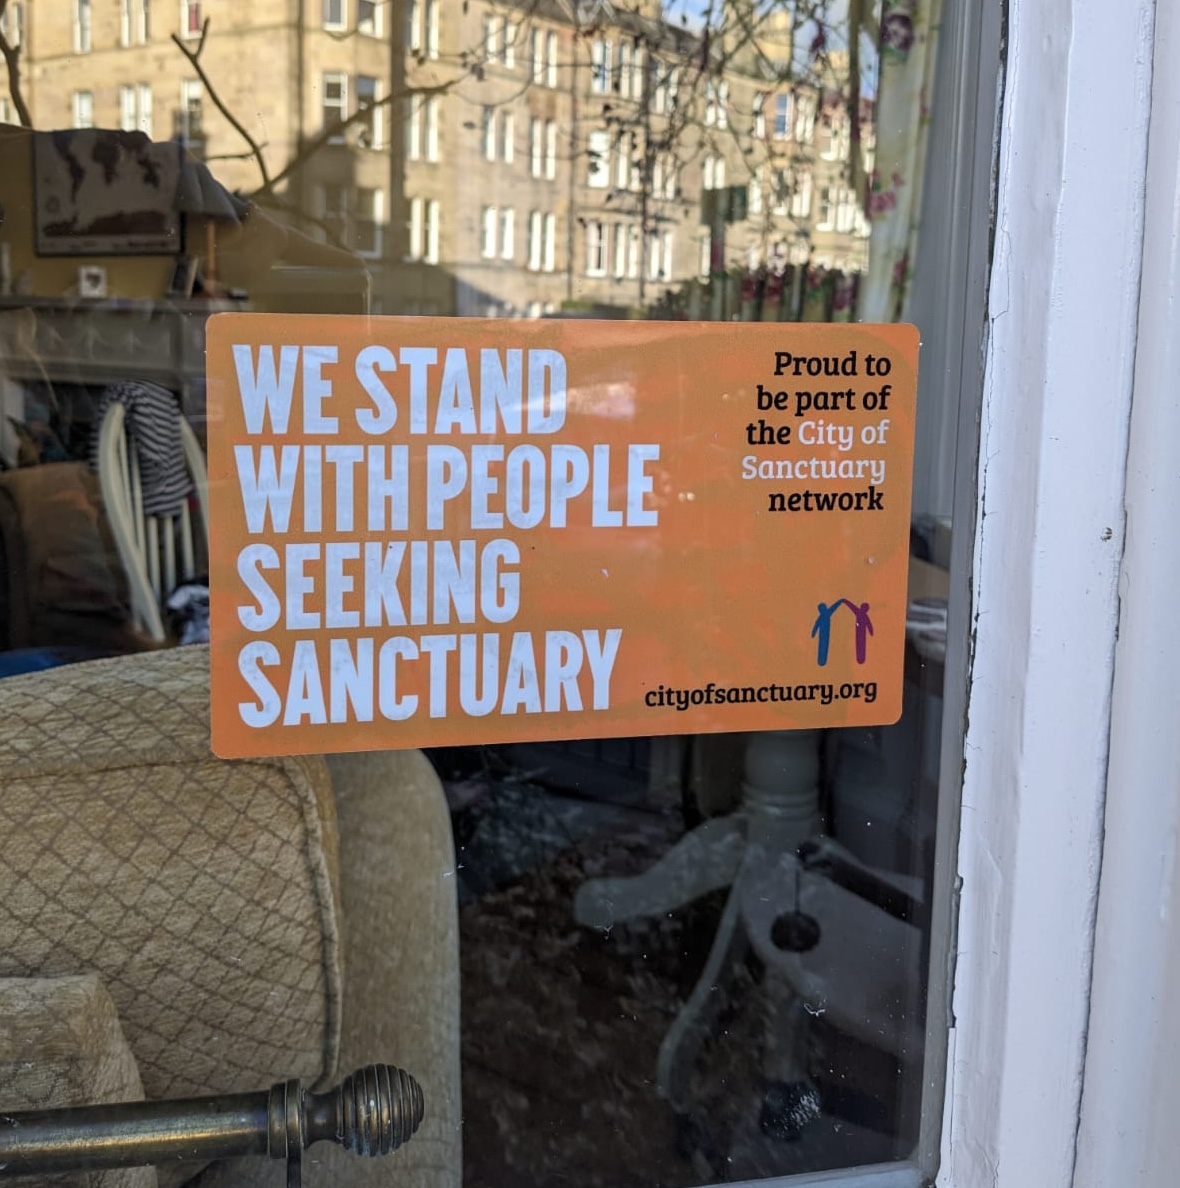 It's time to speak out & stand up📢👋 Our new window stickers are for Sanctuary awarded orgs - making it clear how many are calling for a new compassionate approach to refugees. City of Sanctuary groups can order & distribute or awarded orgs can directly docs.google.com/forms/d/e/1FAI…